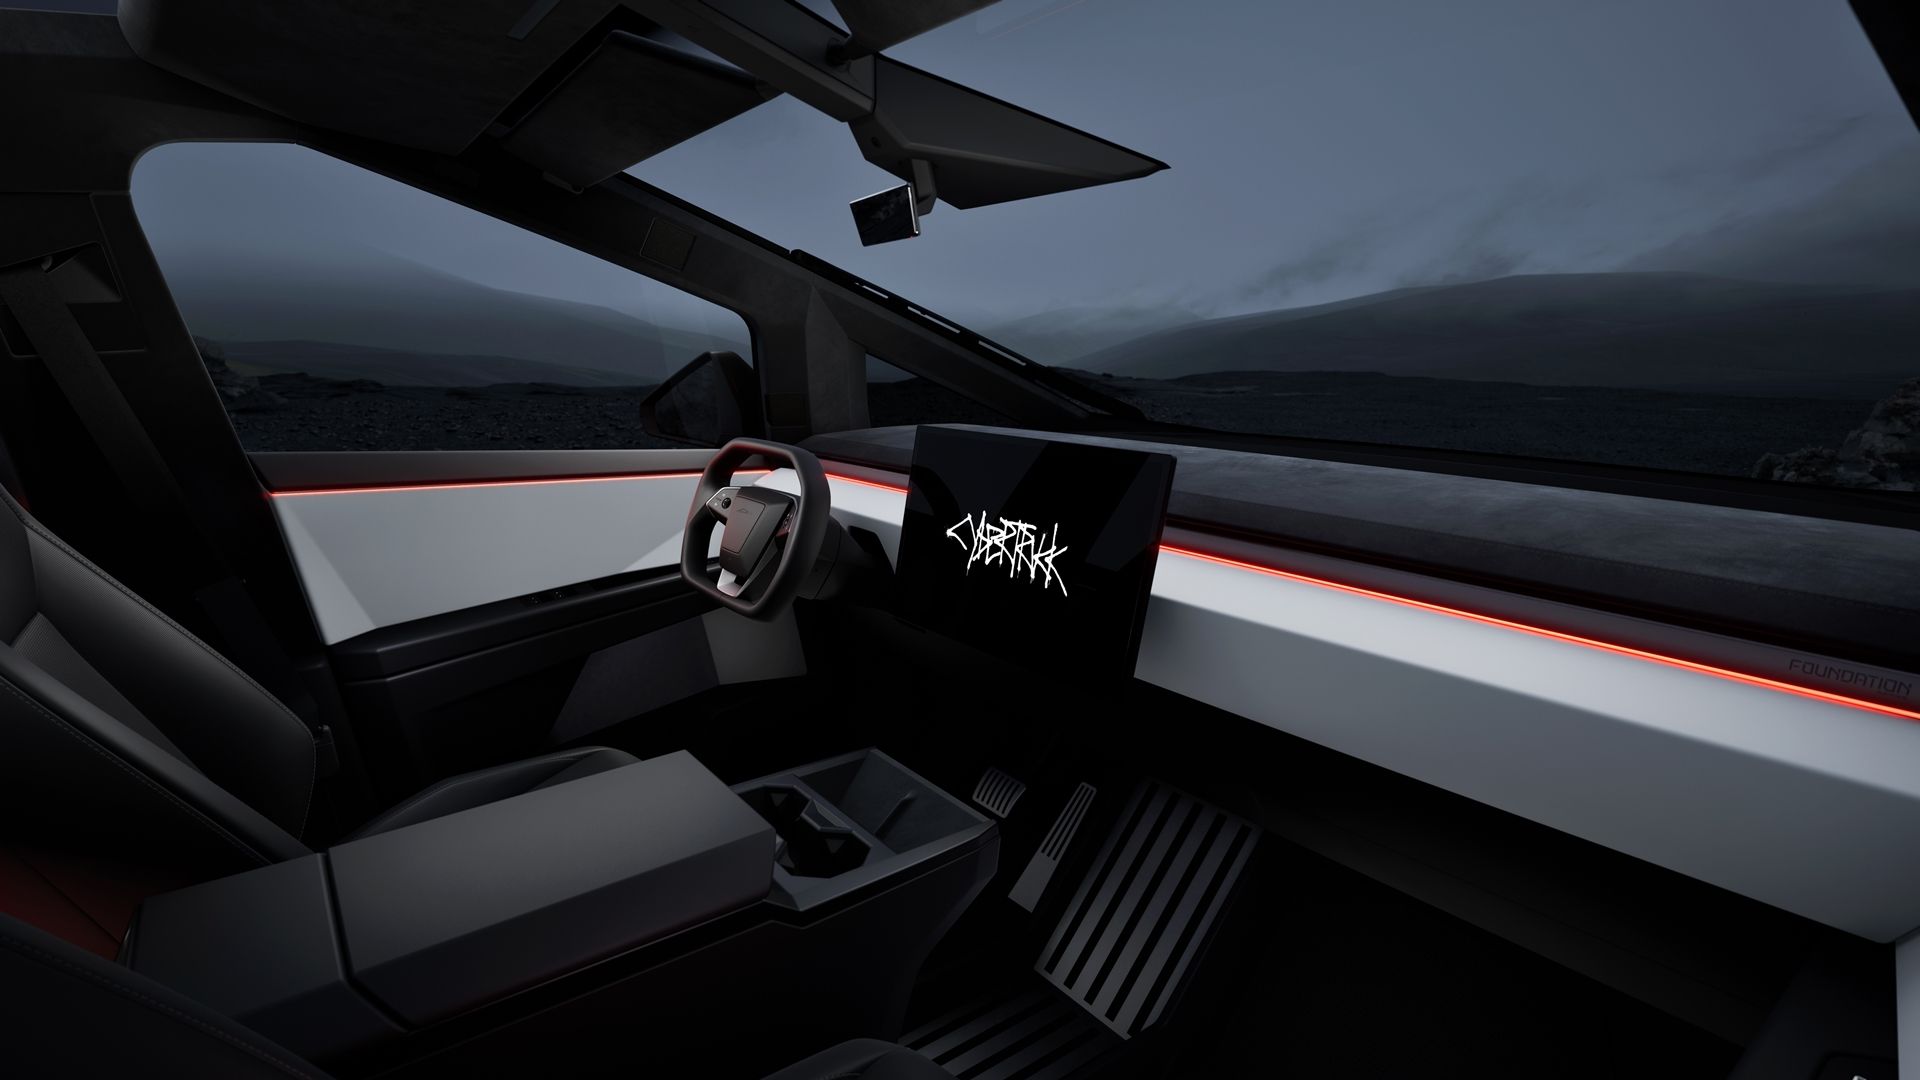 Image depicts the interior of the Tesla Cybertruck from the passenger side